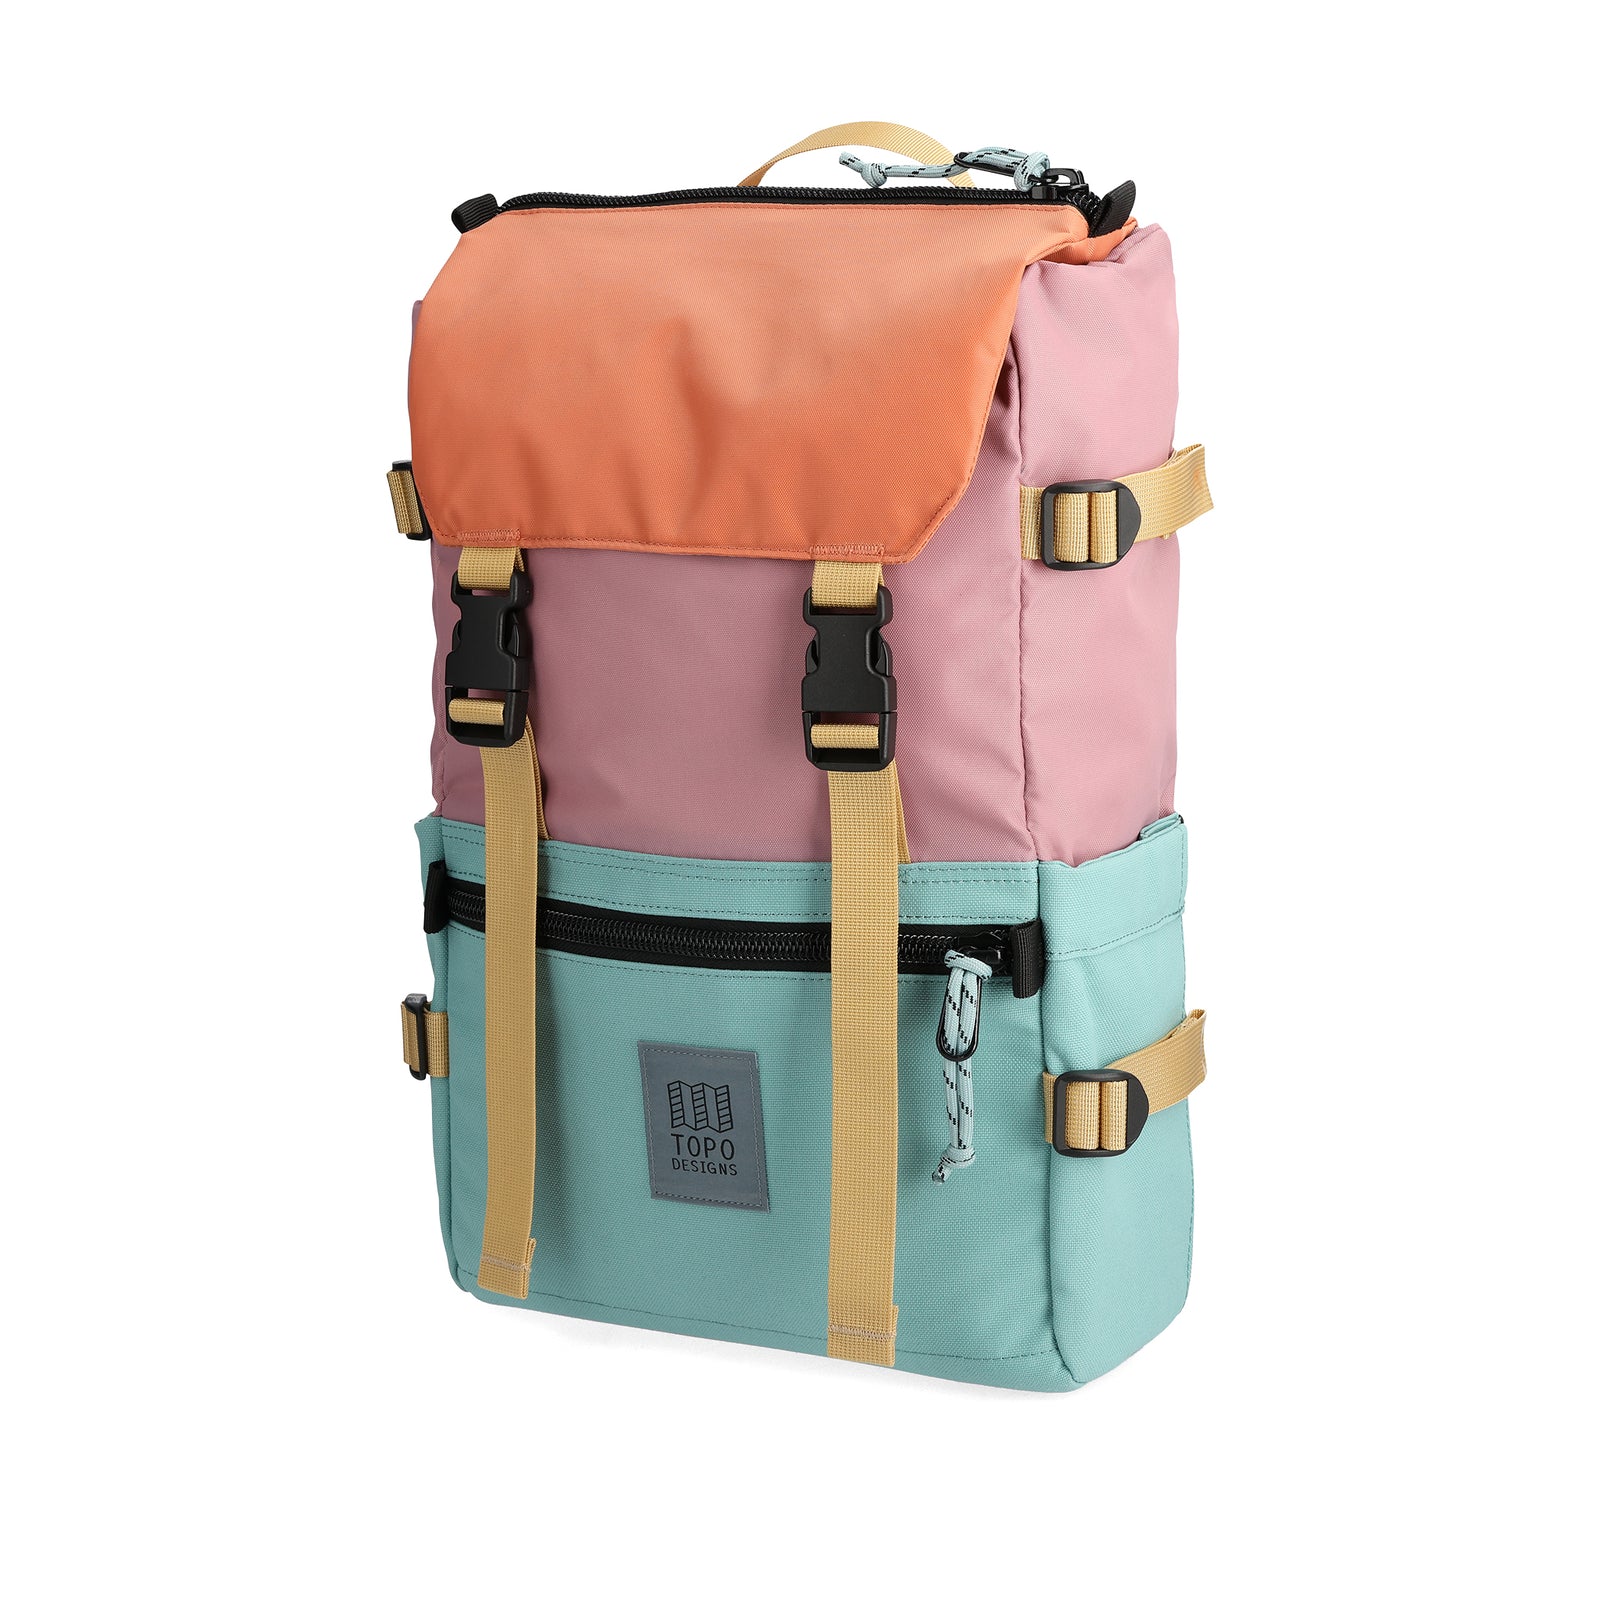 Front View of Topo Designs Rover Pack Classic in "Rose / Geode Green"